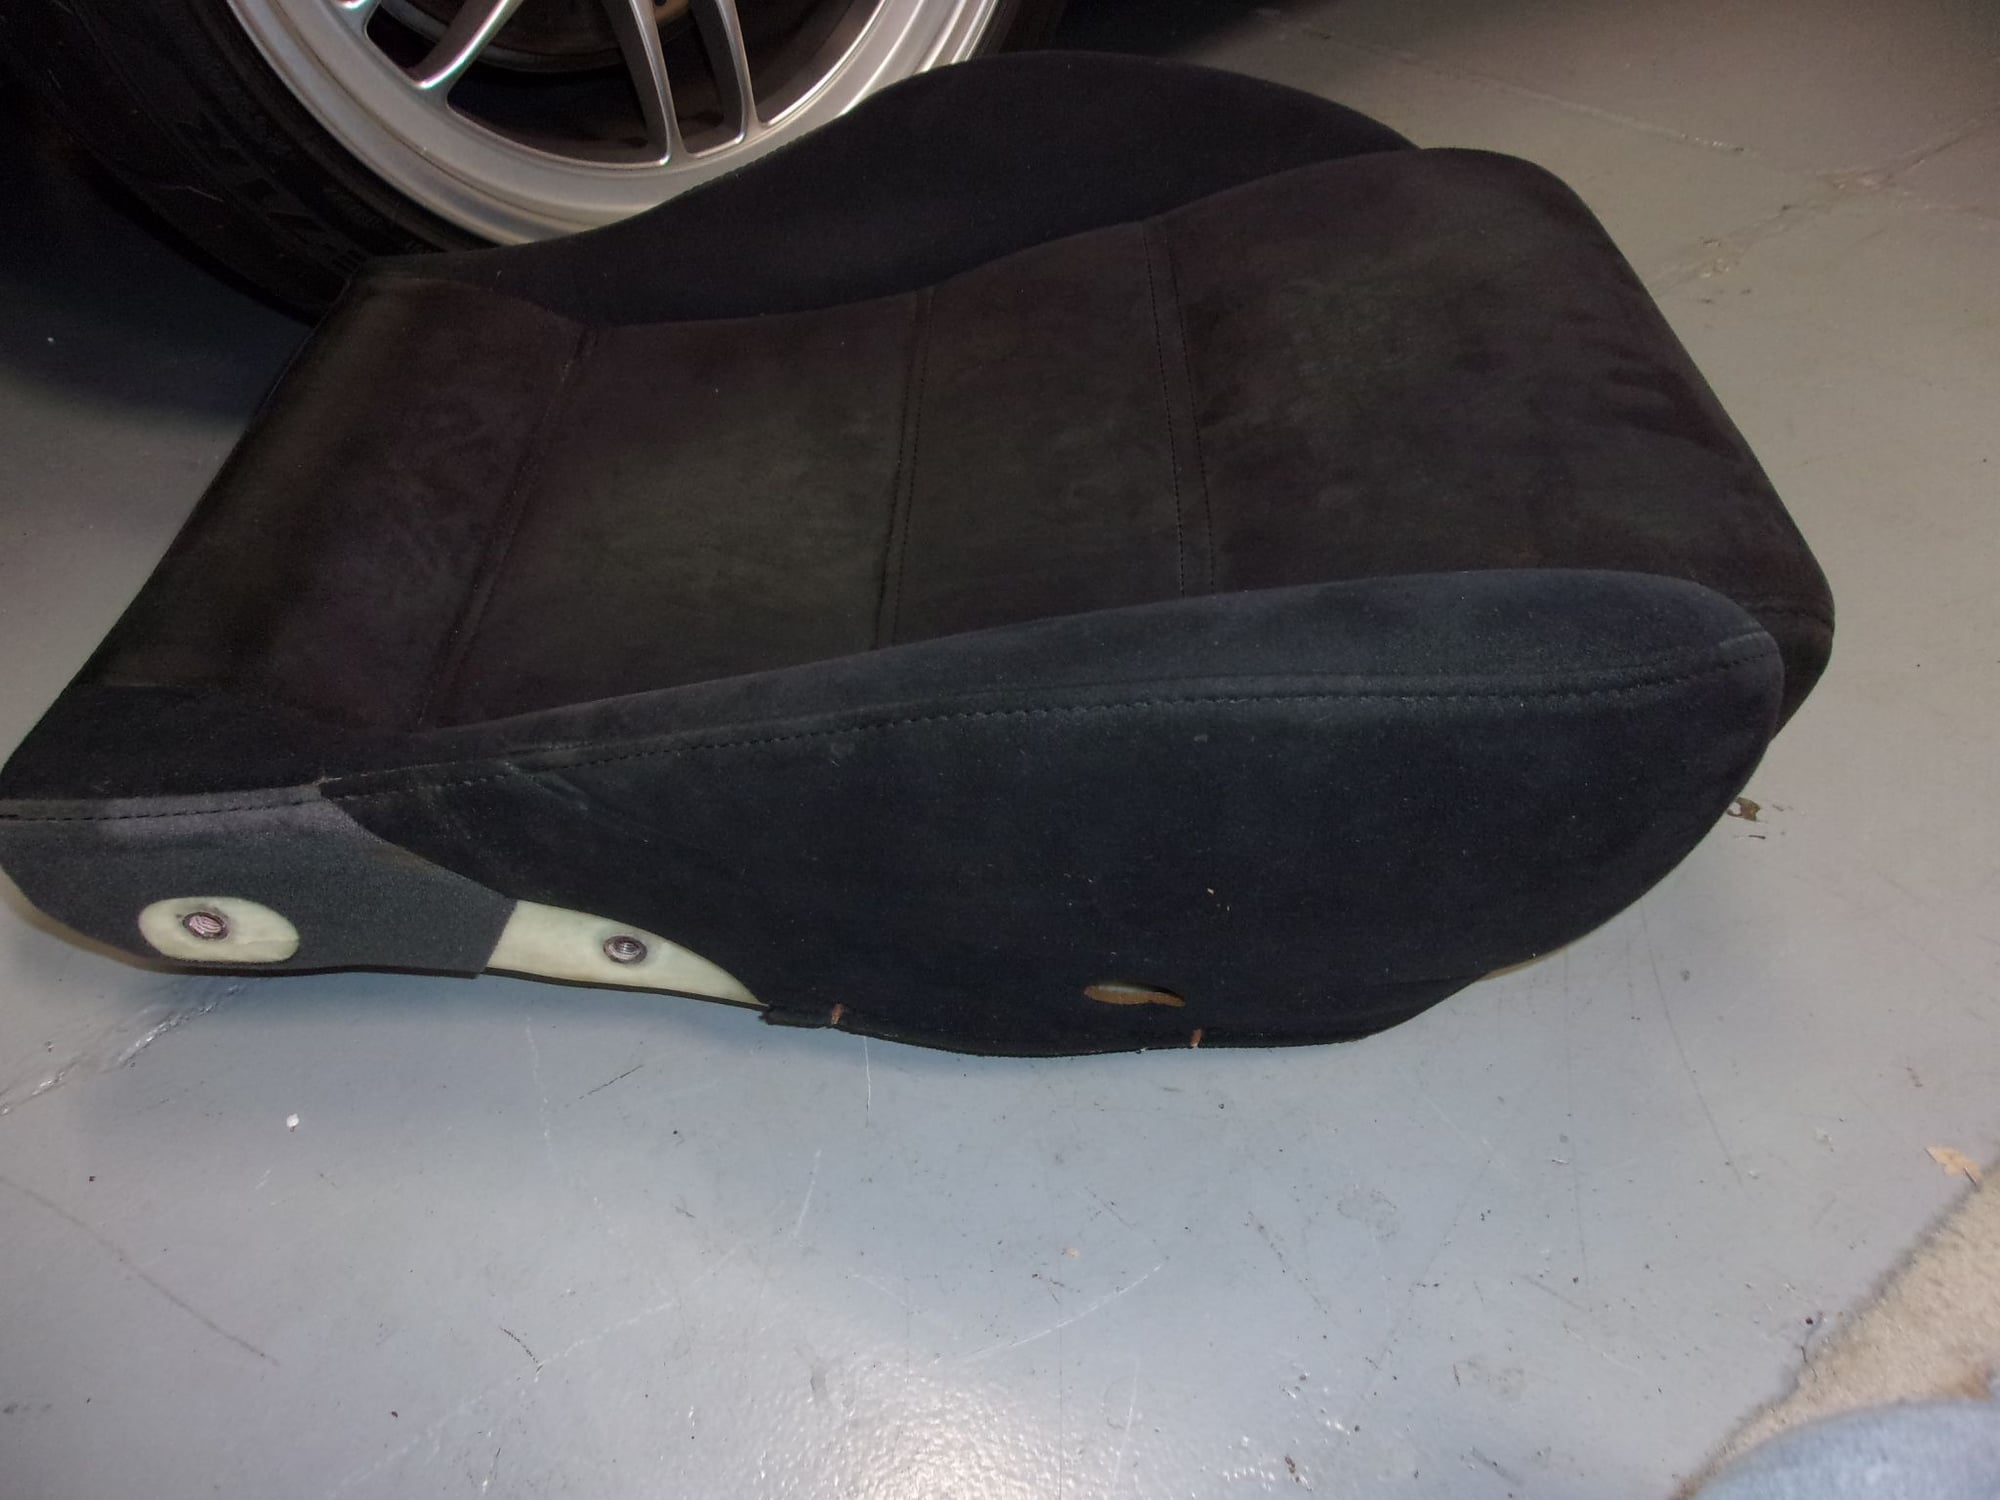 Interior/Upholstery - R1 Suede Seat Bottom - Used - 1993 to 1995 Mazda RX-7 - Murfreesboro, TN 37130, United States